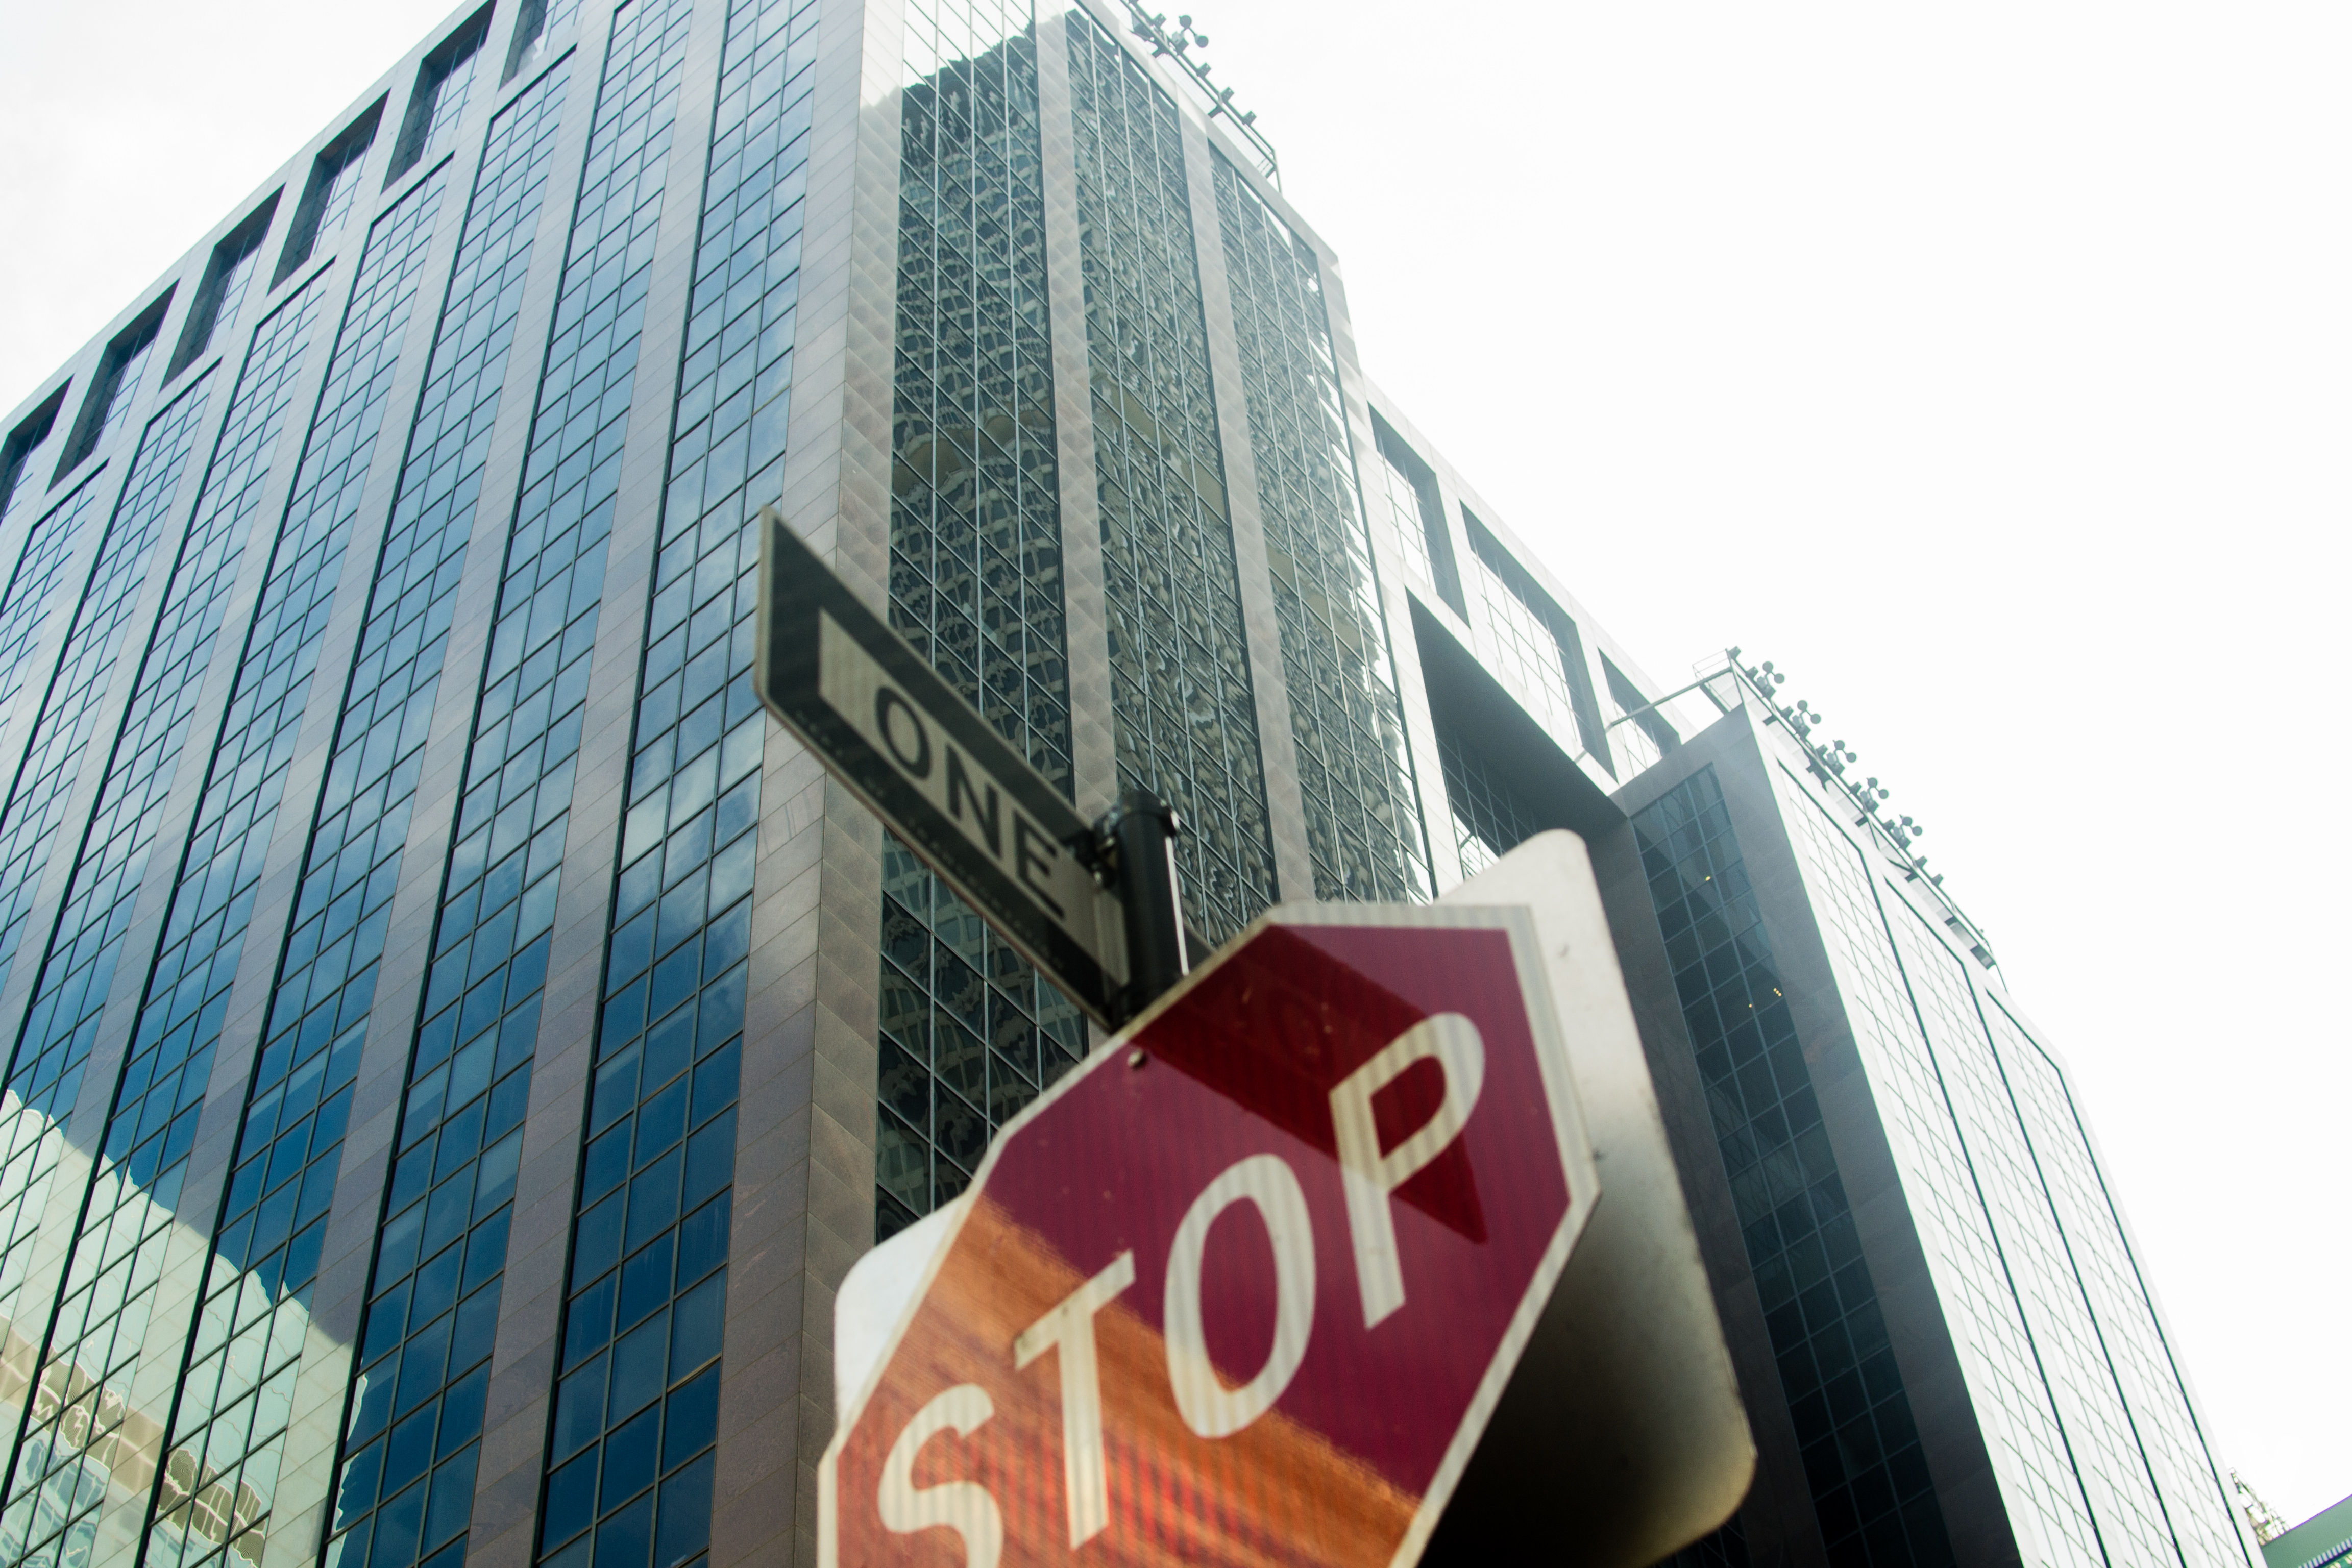 Perspective of a person looking up at a stop sign with skyscrapers in the background